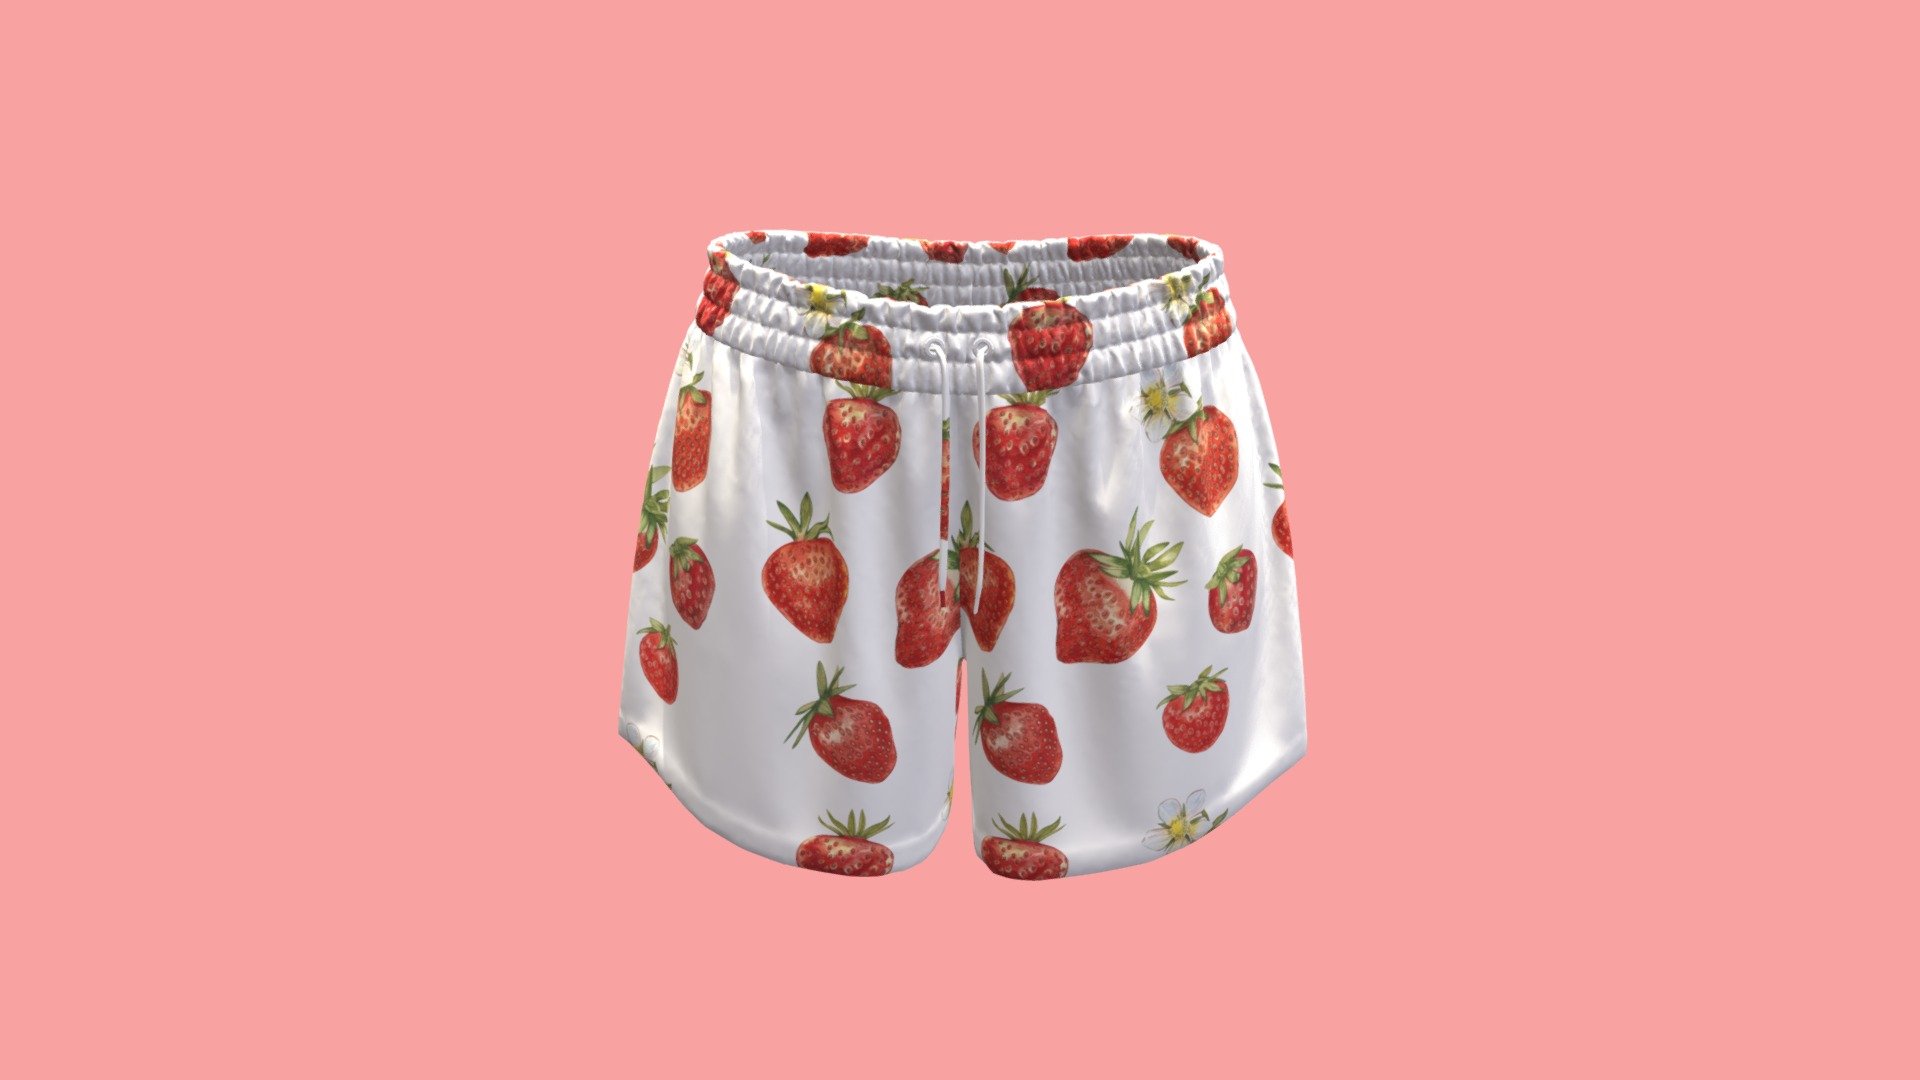 Cloth Title = Strawberry Print Women Swim Shorts Design 

SKU = DG100097  

Category = Women  

Product Type = Short  

Cloth Length = Short  

Body Fit = Slim Fit  

Occasion = Beach 


Our Services:

3D Apparel Design.

OBJ,FBX,GLTF Making with High/Low Poly.

Fabric Digitalization.

Mockup making.

3D Teck Pack.

Pattern Making.

2D Illustration.

Cloth Animation and 360 Spin Video.


Contact us:- 

Email: info@digitalfashionwear.com 

Website: https://digitalfashionwear.com 

WhatsApp No: +8801759350445 


We designed all the types of cloth specially focused on product visualization, e-commerce, fitting, and production. 

We will design: 

T-shirts 

Polo shirts 

Hoodies 

Sweatshirt 

Jackets 

Shirts 

TankTops 

Trousers 

Bras 

Underwear 

Blazer 

Aprons 

Leggings 

and All Fashion items. 





Our goal is to make sure what we provide you, meets your demand 3d model